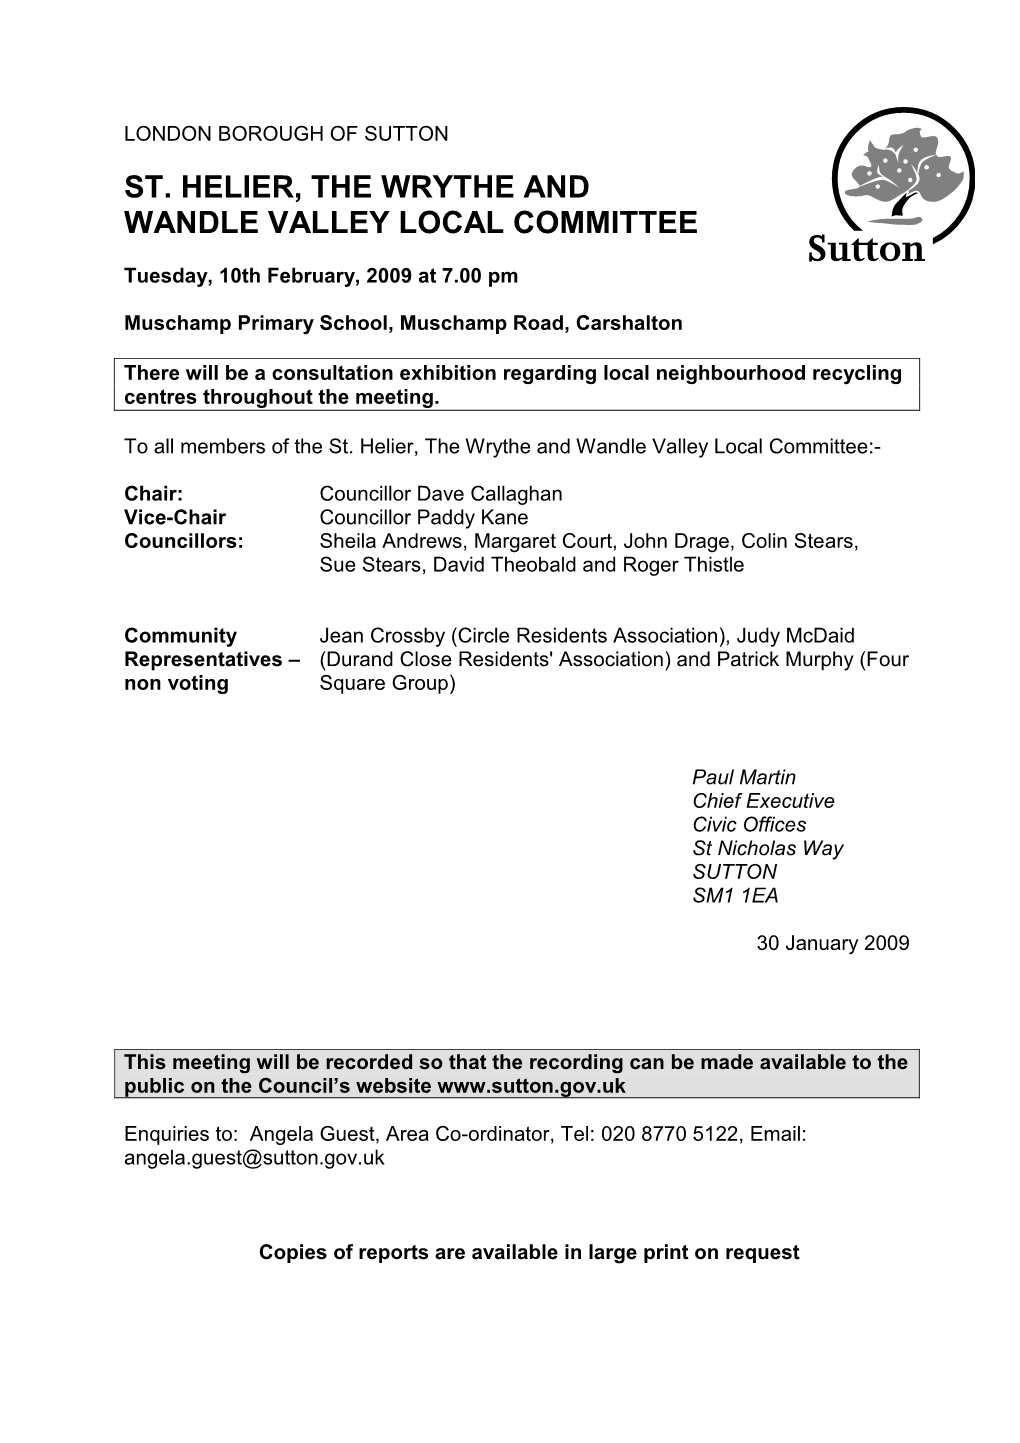 St. Helier, the Wrythe and Wandle Valley Local Committee